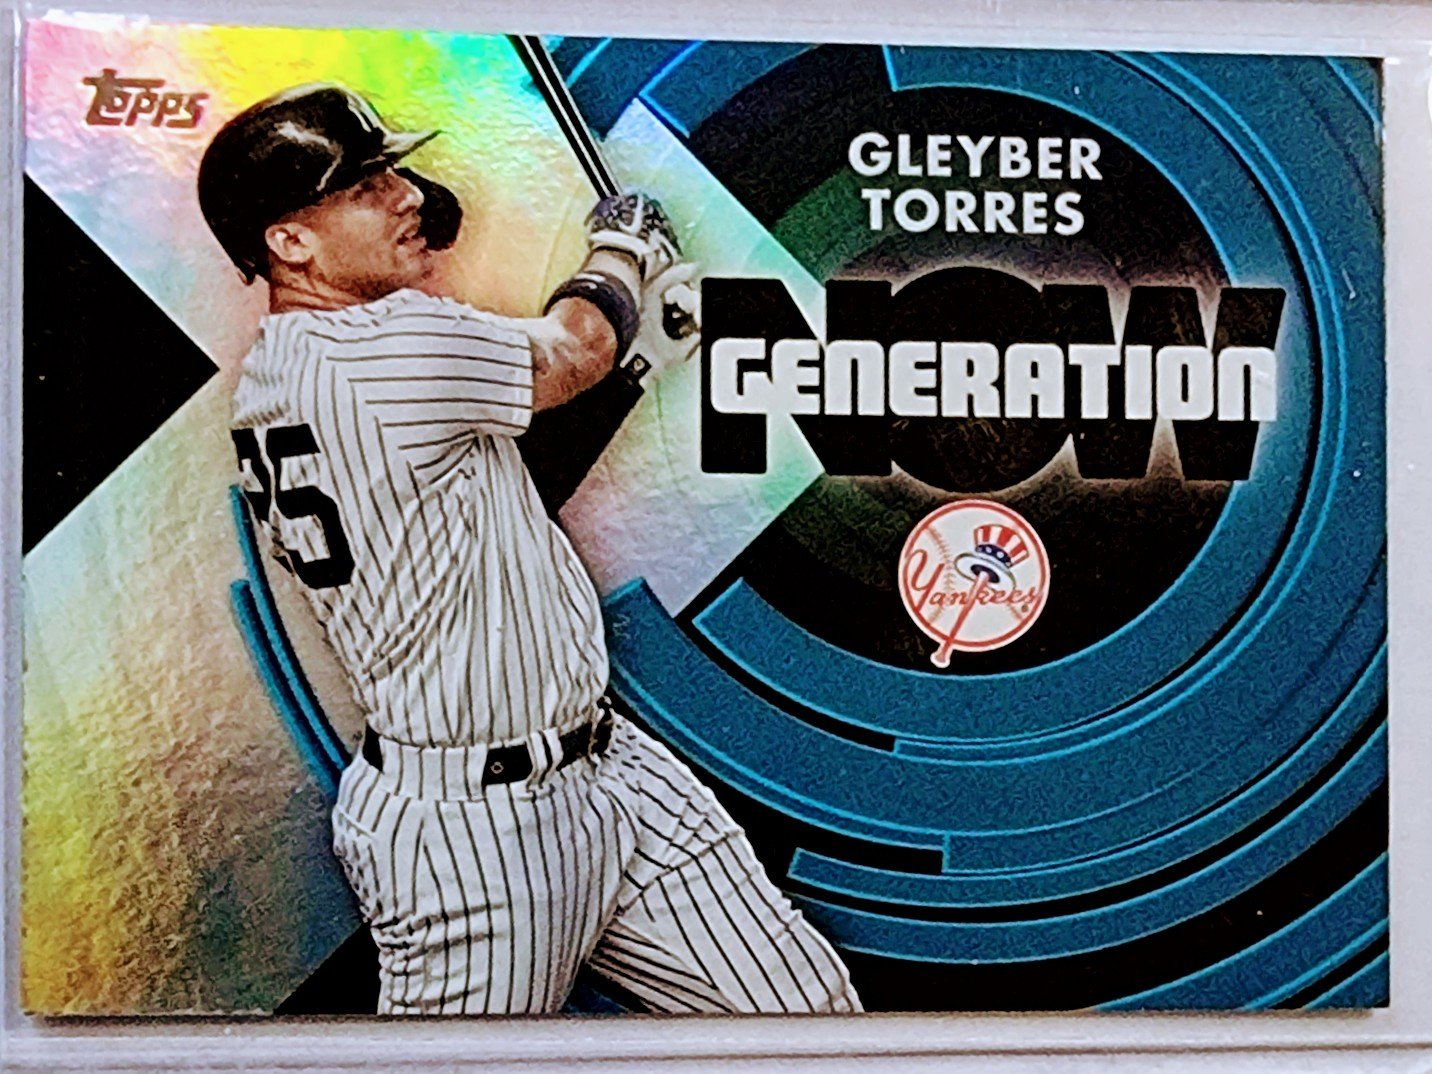 2022 Topps Series 1 Gleyber Torres Generation Now Baseball Card simple Xclusive Collectibles   